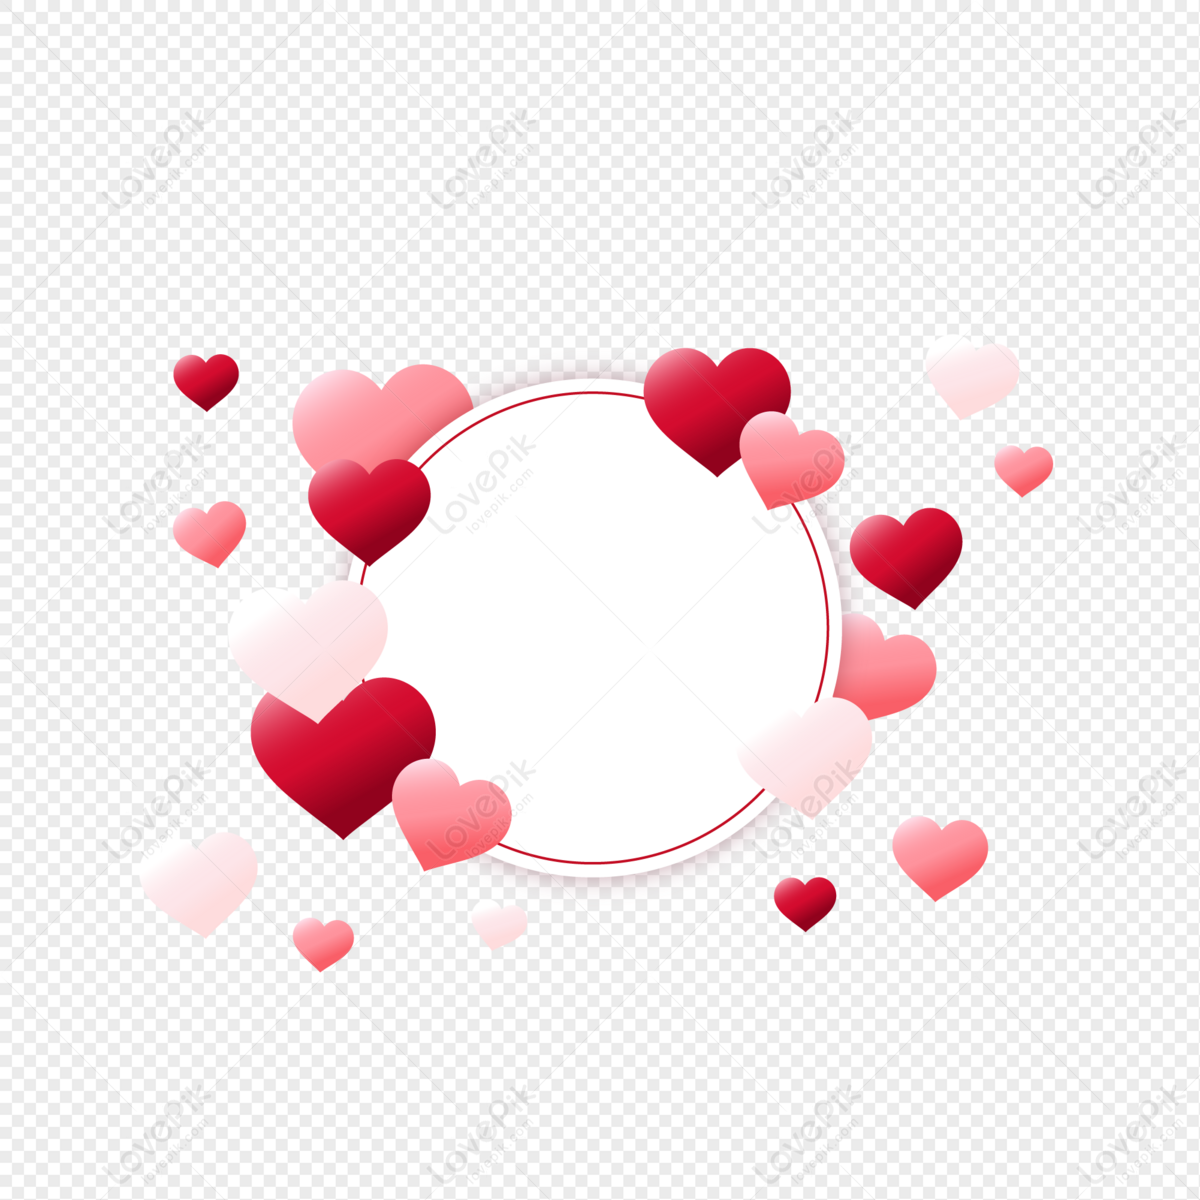 Round Love Border PNG Image And Clipart Image For Free Download ...